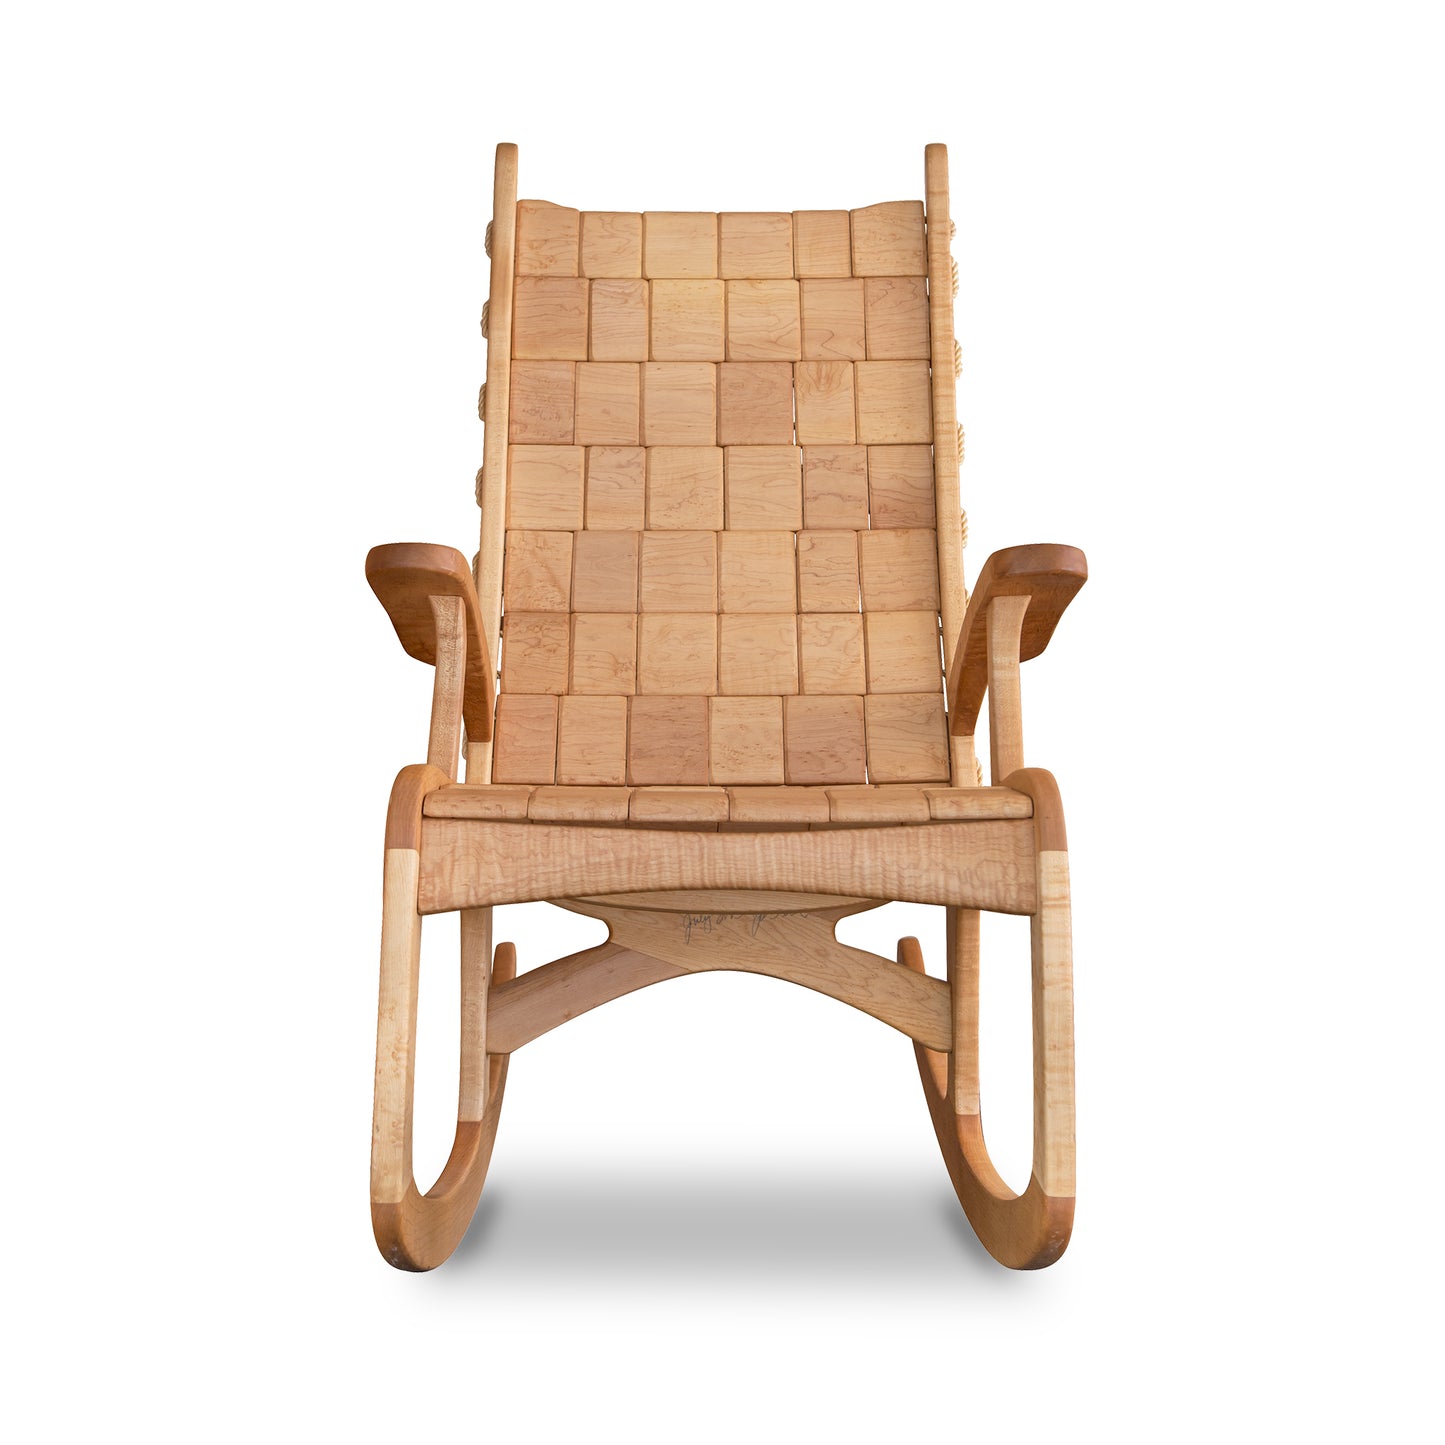 A modern Quilted Vermont Birdseye Maple Rocking Chair with a square-patterned woven seat and backrest, isolated on a white background, by Vermont Folk Rocker.